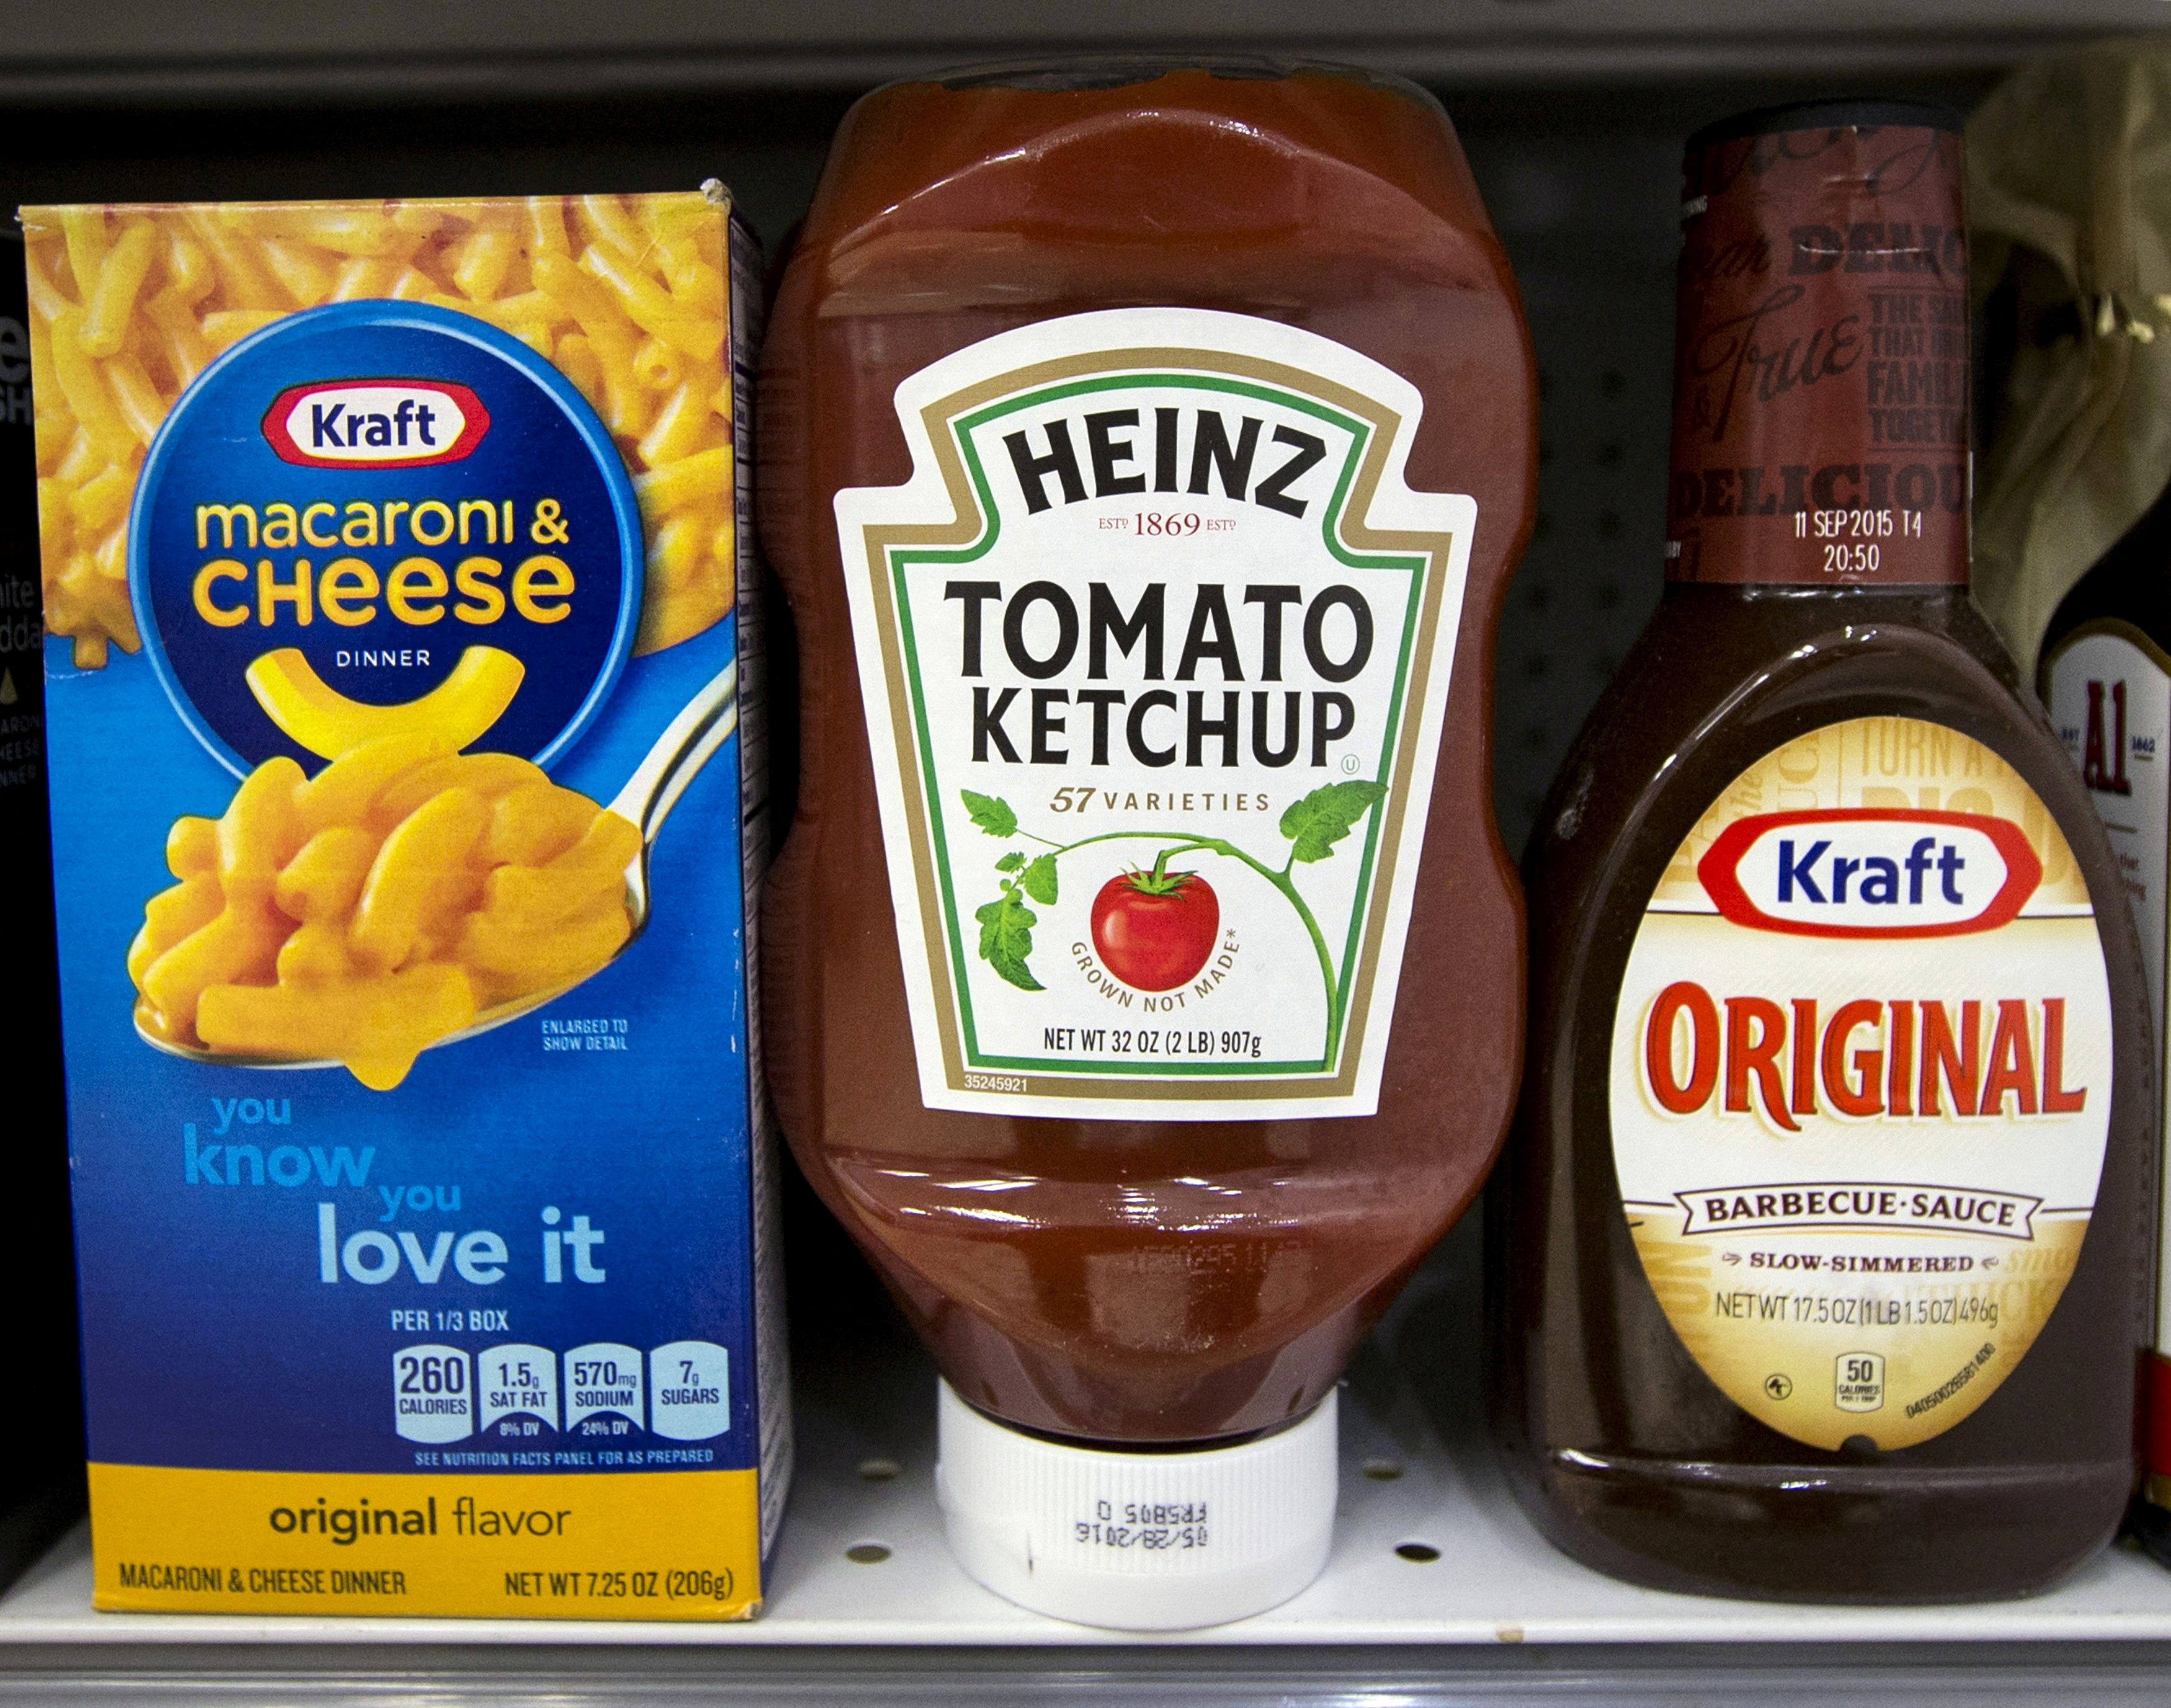 A Heinz Ketchup bottle sits between a box of Kraft macaroni and cheese and a bottle of Kraft Original Barbecue Sauce on a grocery store shelf in New York